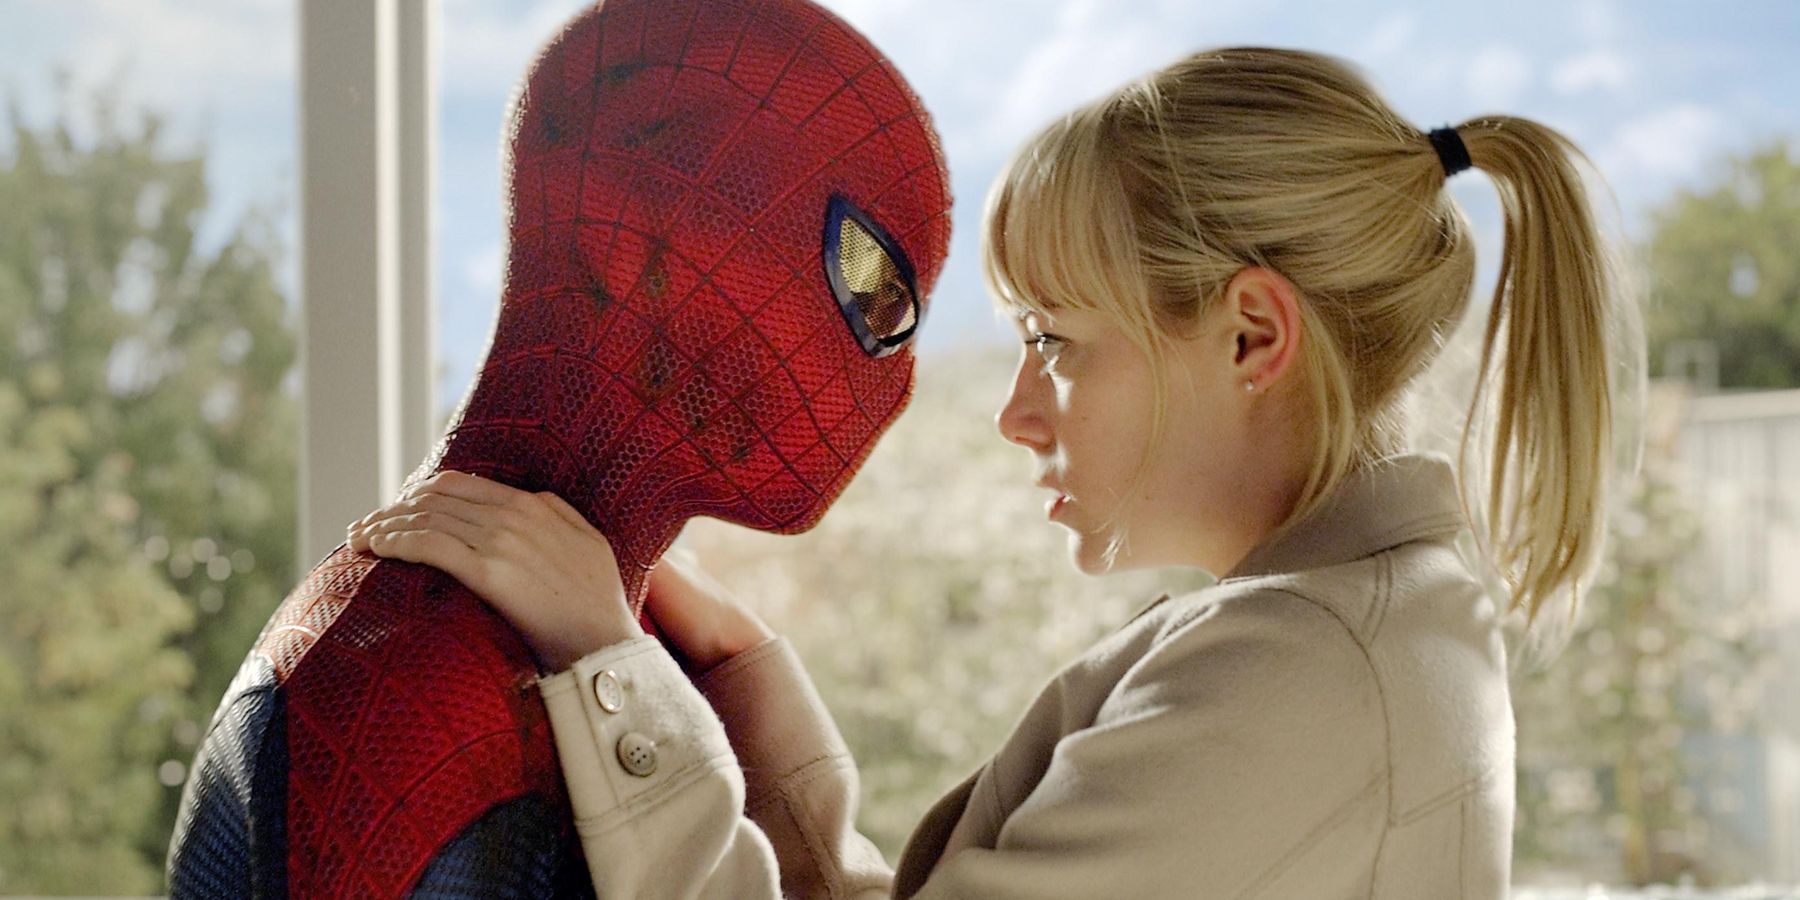 Gwen Stacy looking in Spider-Man's eyes in The Amazing Spider-Man